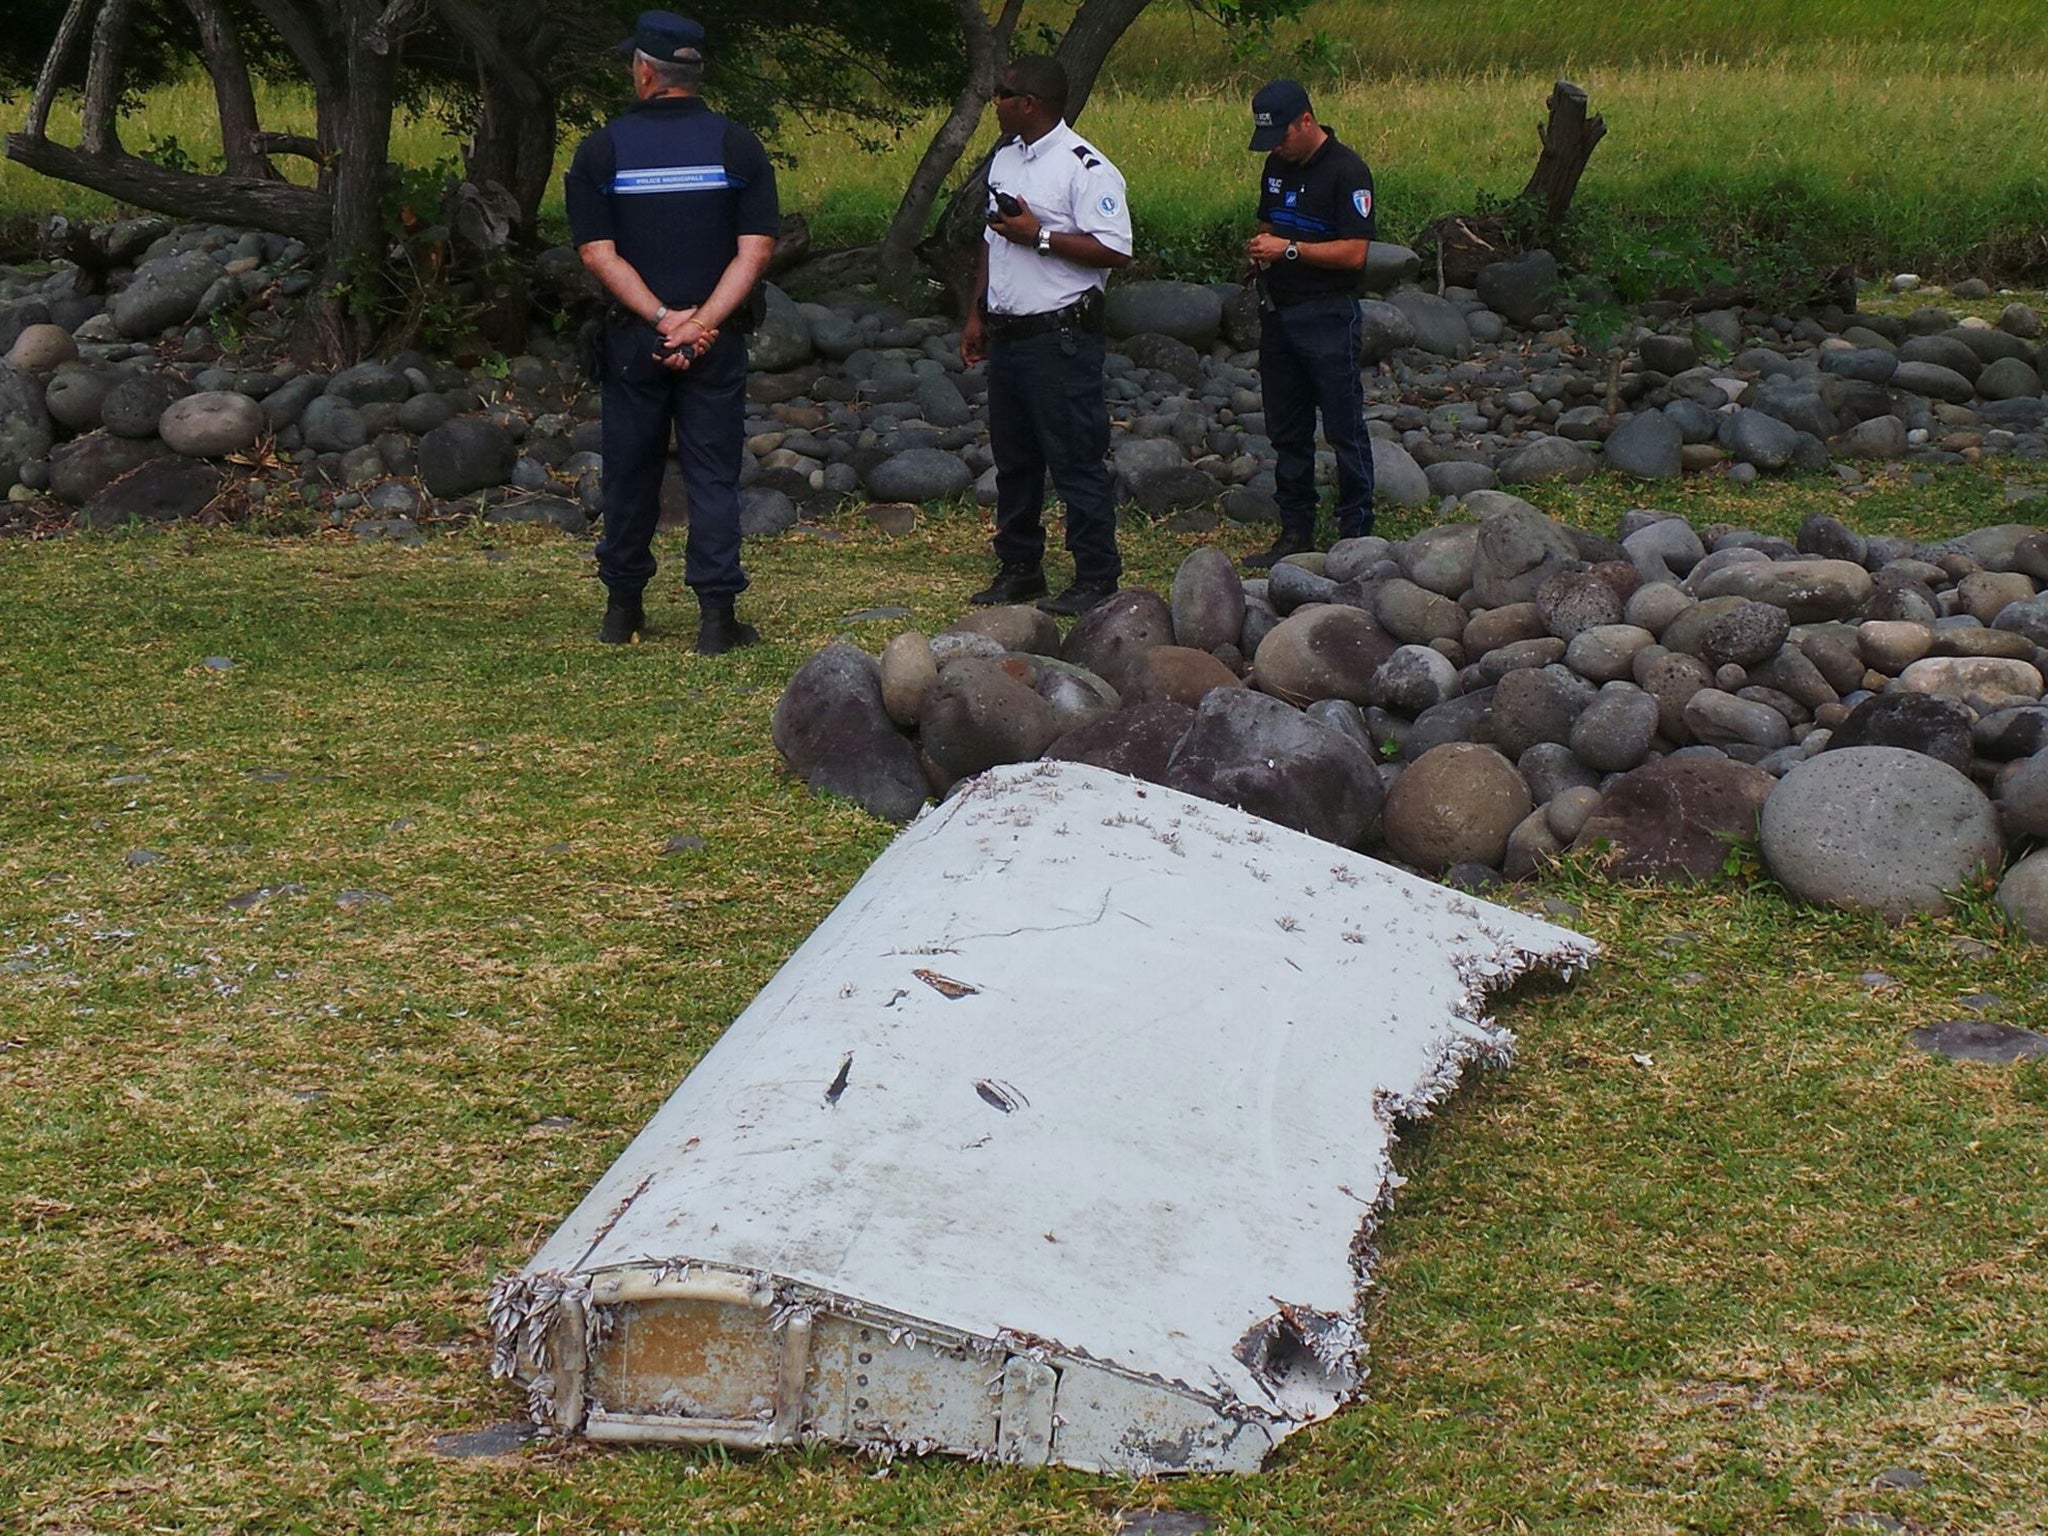 Shortly after the disappearance of MH370, a number of suspects were questioned by Malaysia’s counter-terrorist force